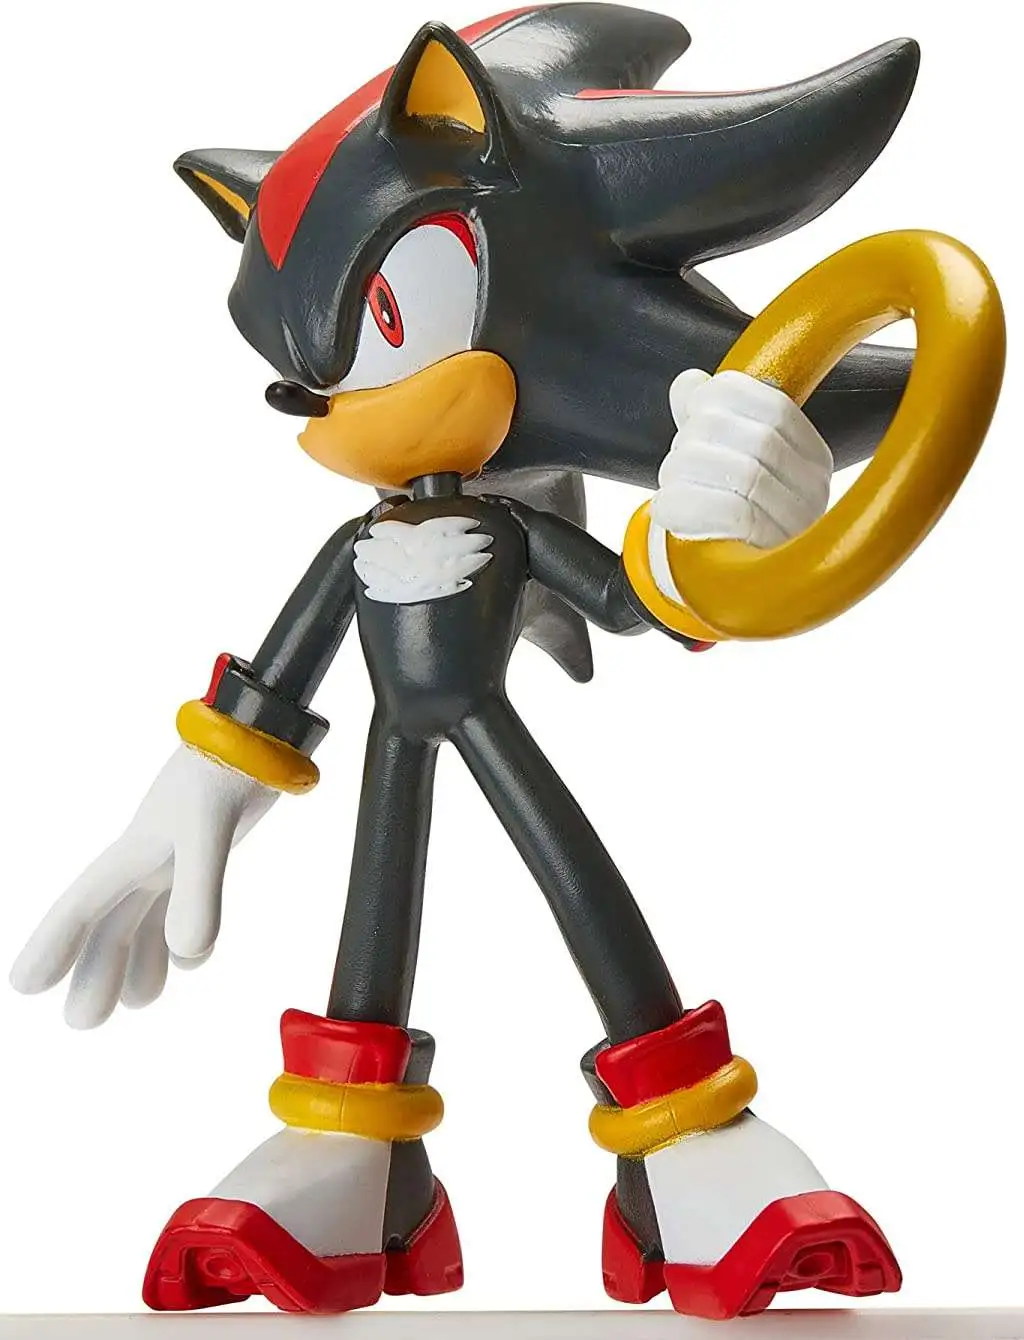 Sonic the Hedgehog Buildable Action Figures (Sonic)